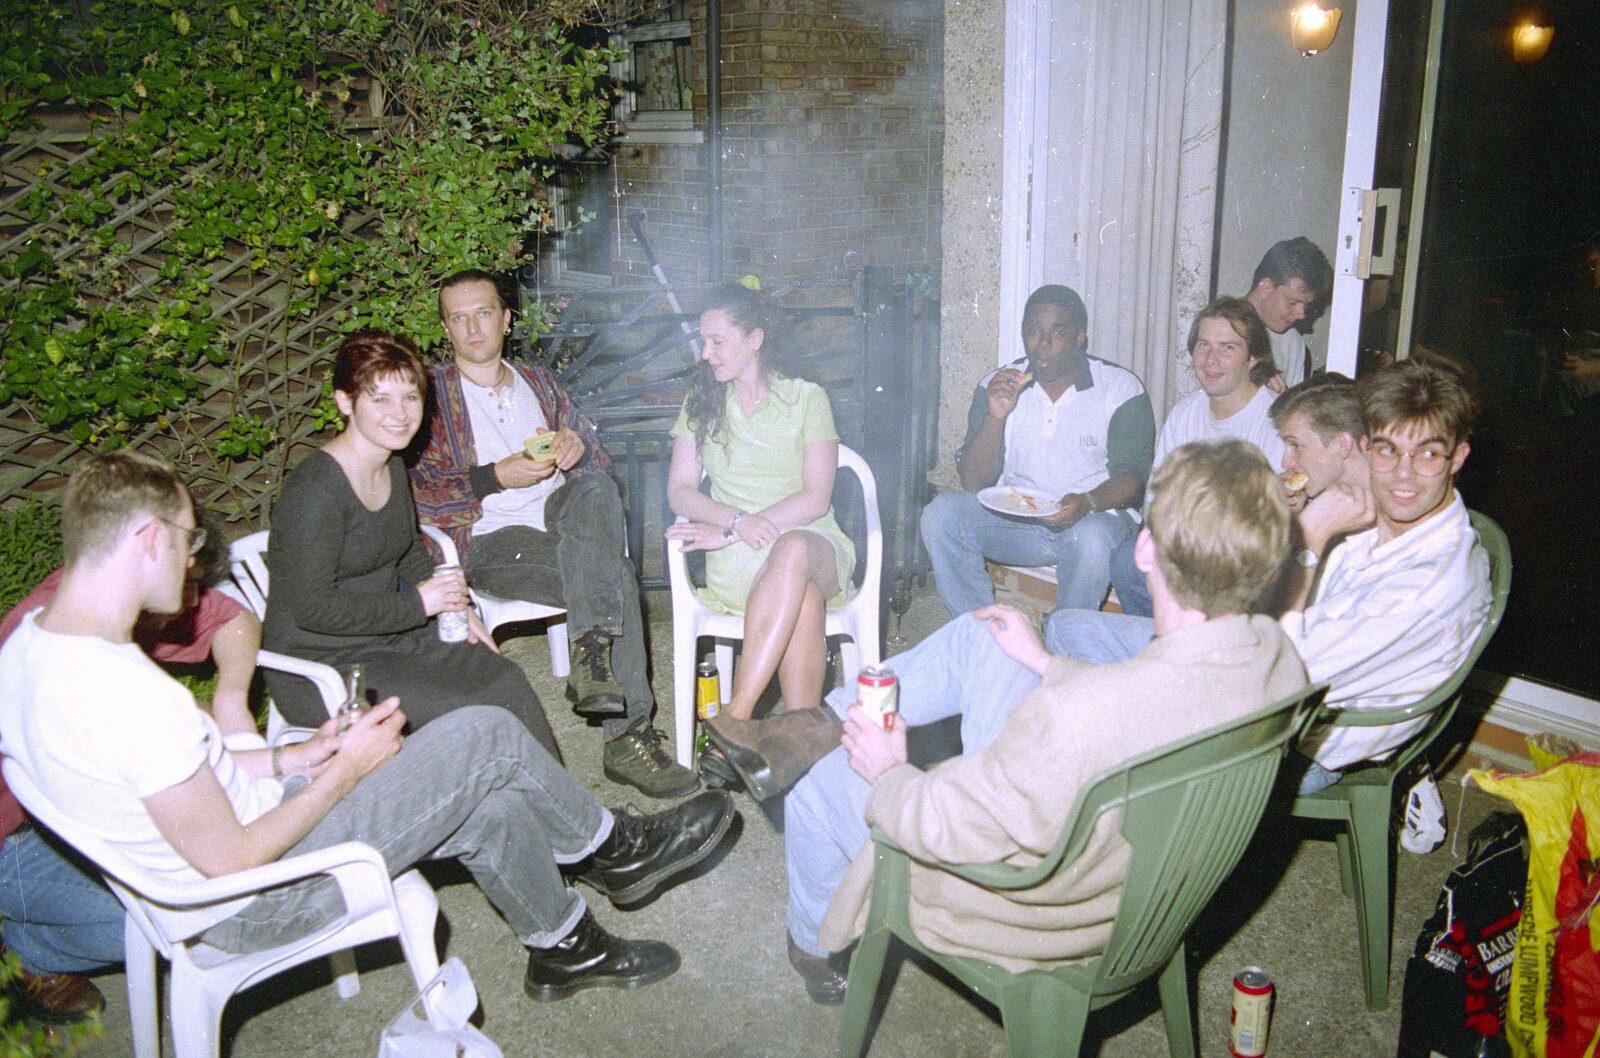 The CISU gang on the patio from The BSCC Does Le Shuttle, and a CISU Party at Andrew's, Saint-Omer and Ipswich - 3rd August 1996